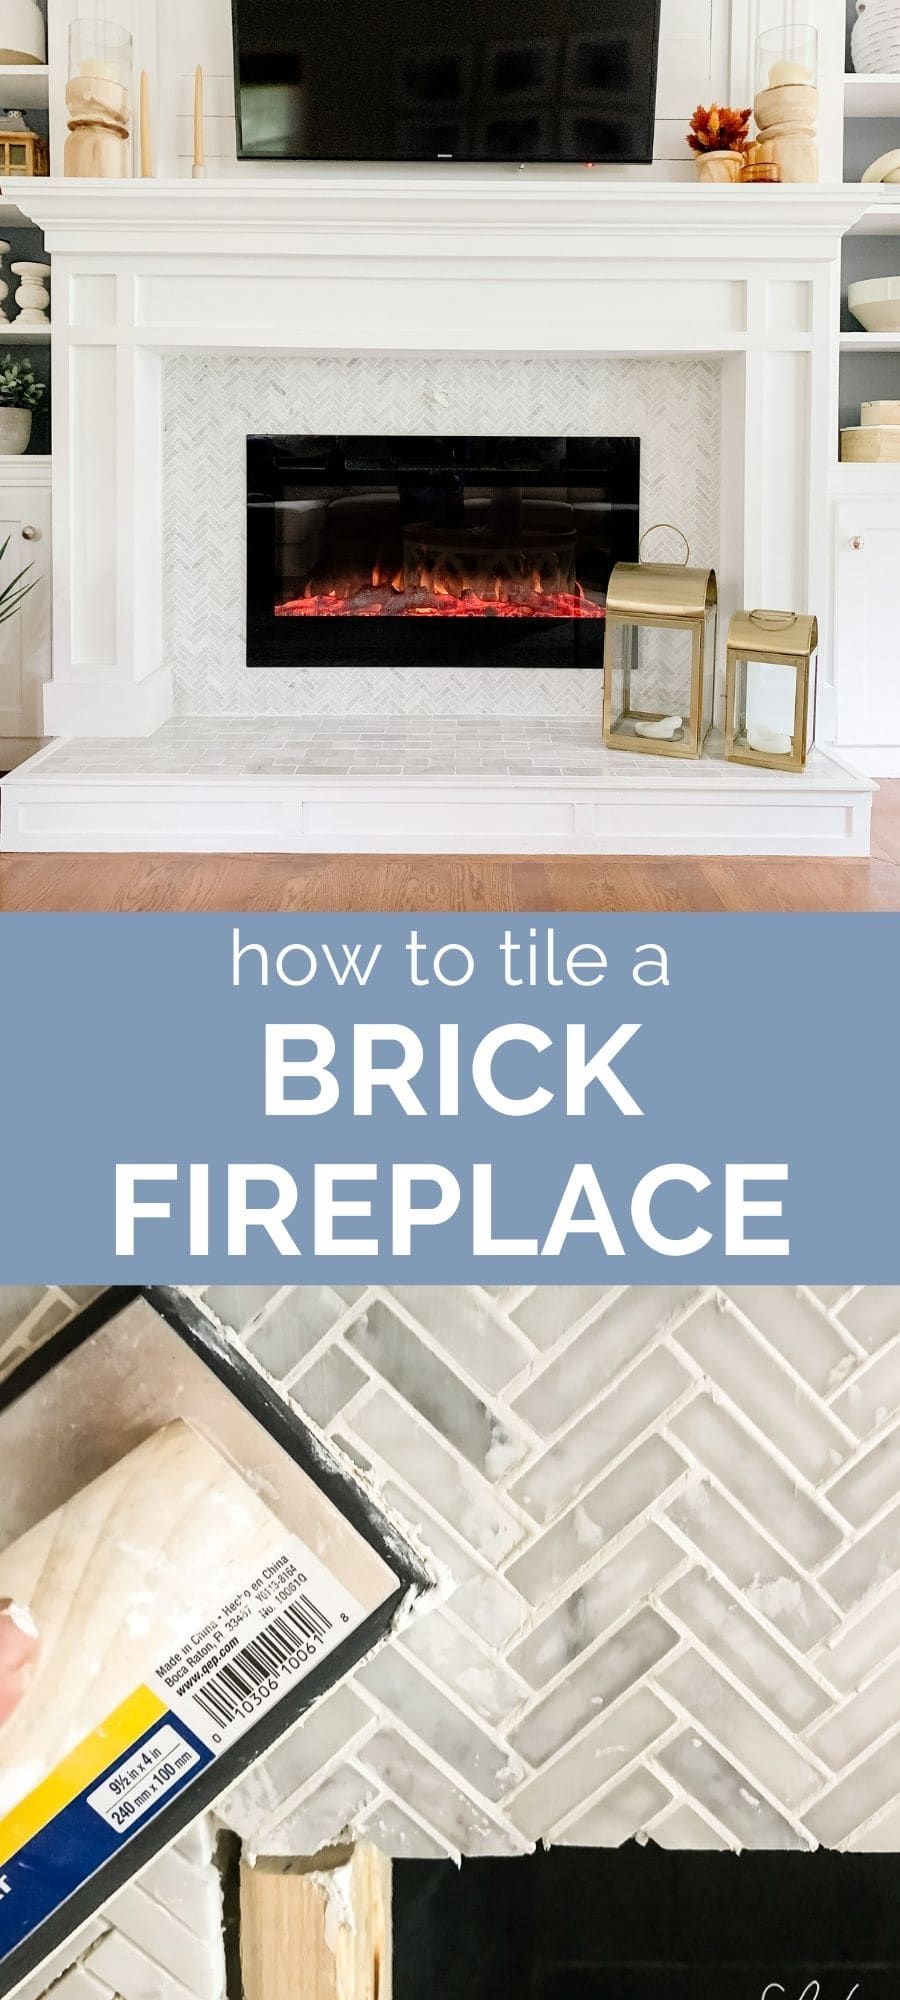 How To Tile A Brick Fireplace Jenna, How To Remove And Replace Fireplace Tile